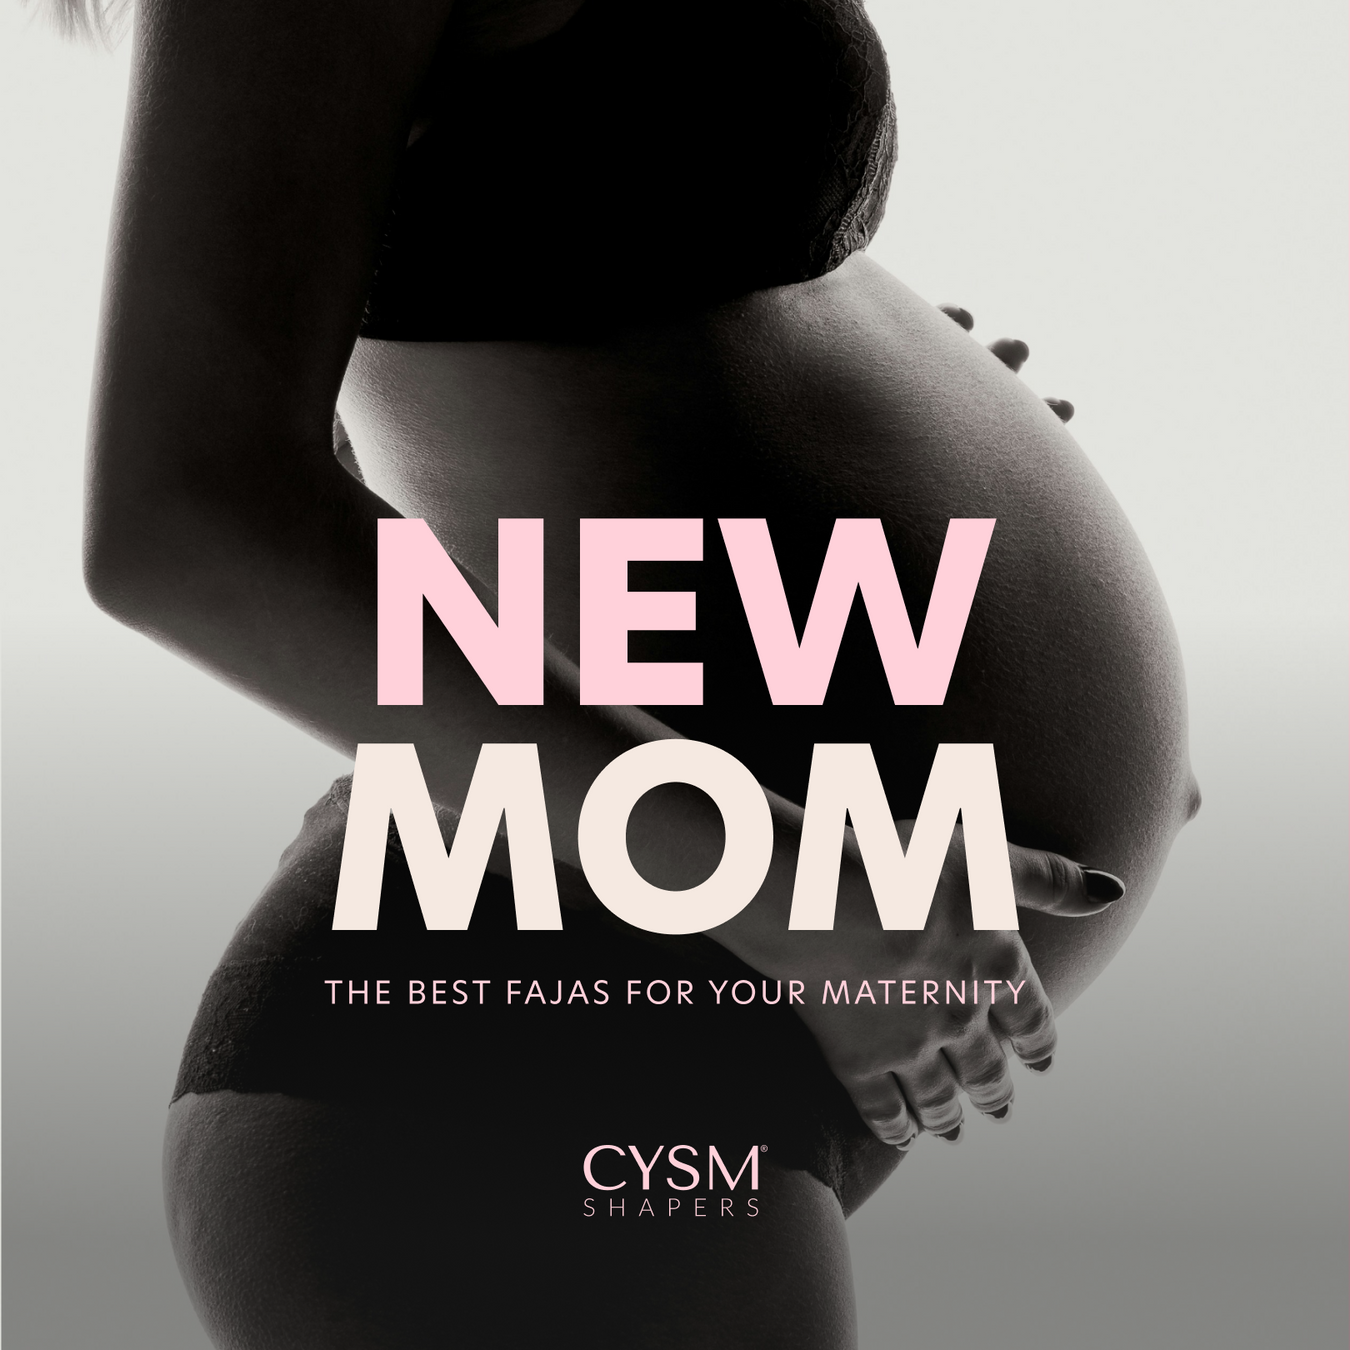 THE BEST FAJAS FOR YOU MATERNITY!